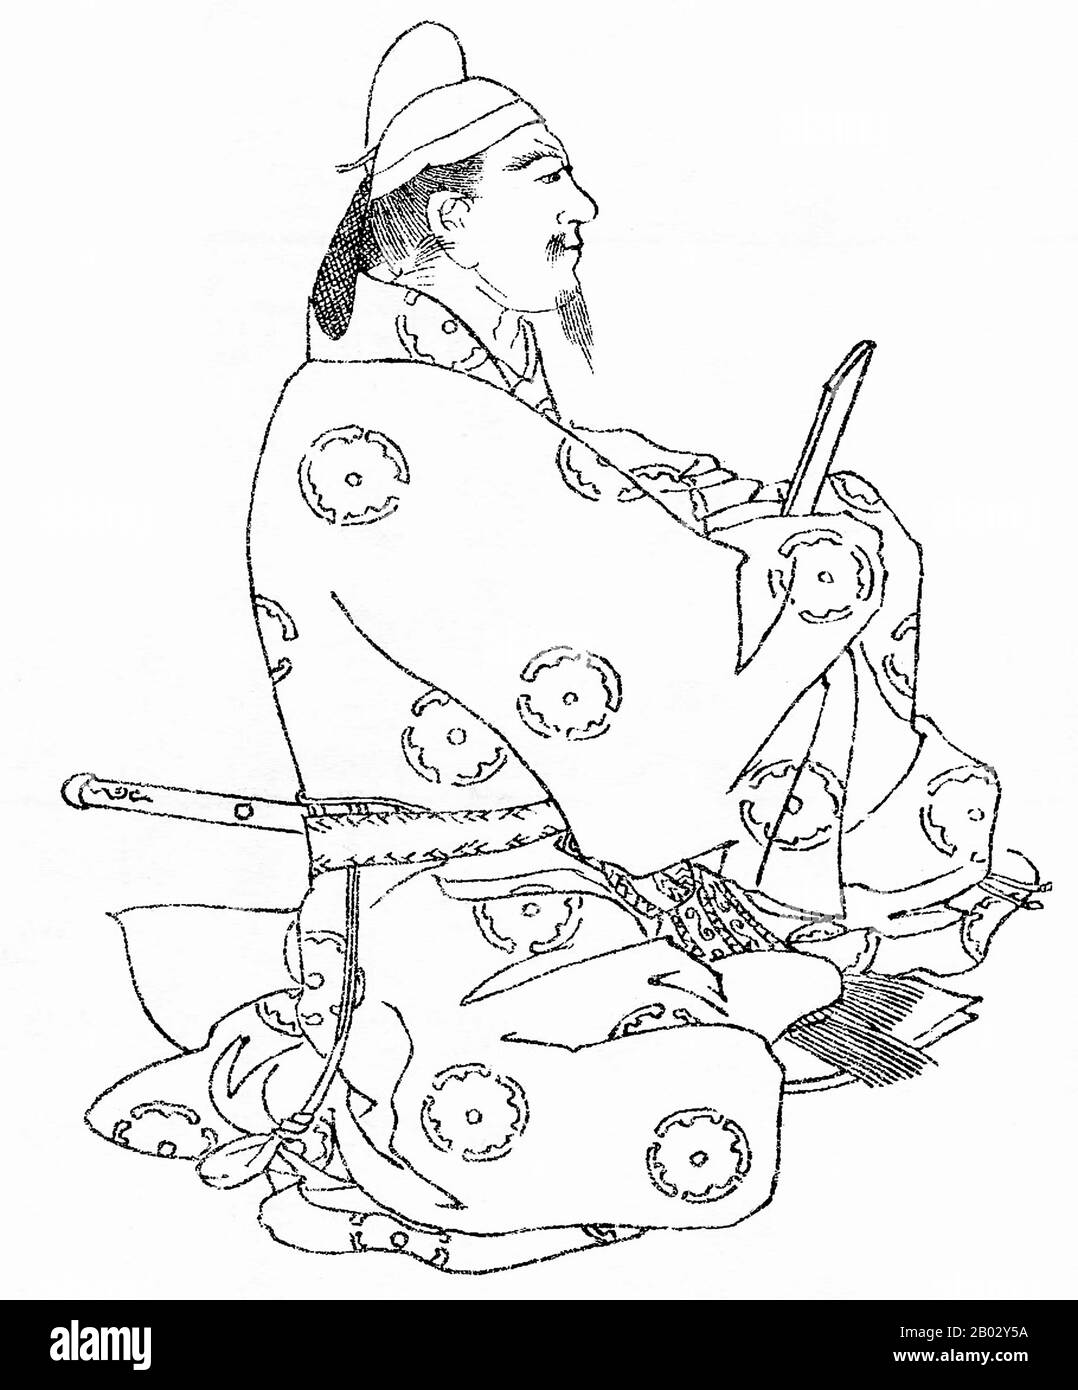 Fujiwara no Umakai was a diplomat during the reign of Empress Genshoand and  a minister during the reign of Emperor Shomu. In the Imperial court, Umakai  was the chief of protocol (Shikibu-kyo).